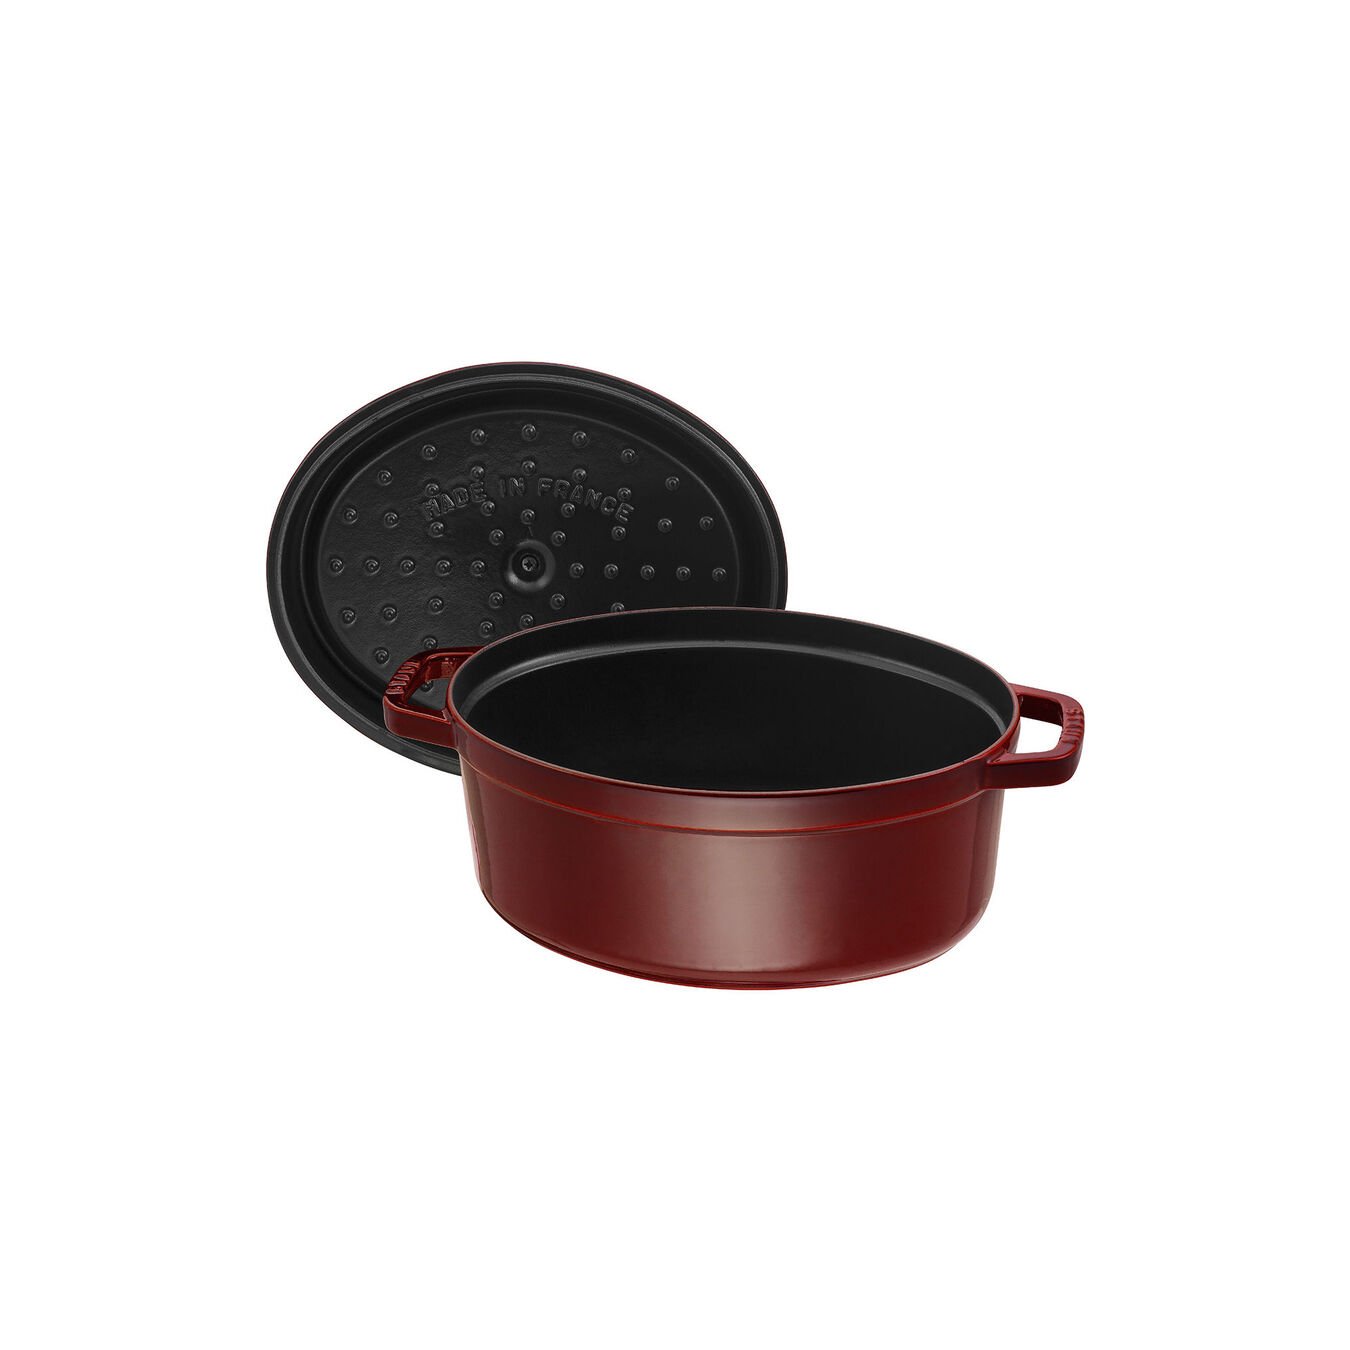 5.5 l cast iron oval Cocotte, grenadine-red,,large 3